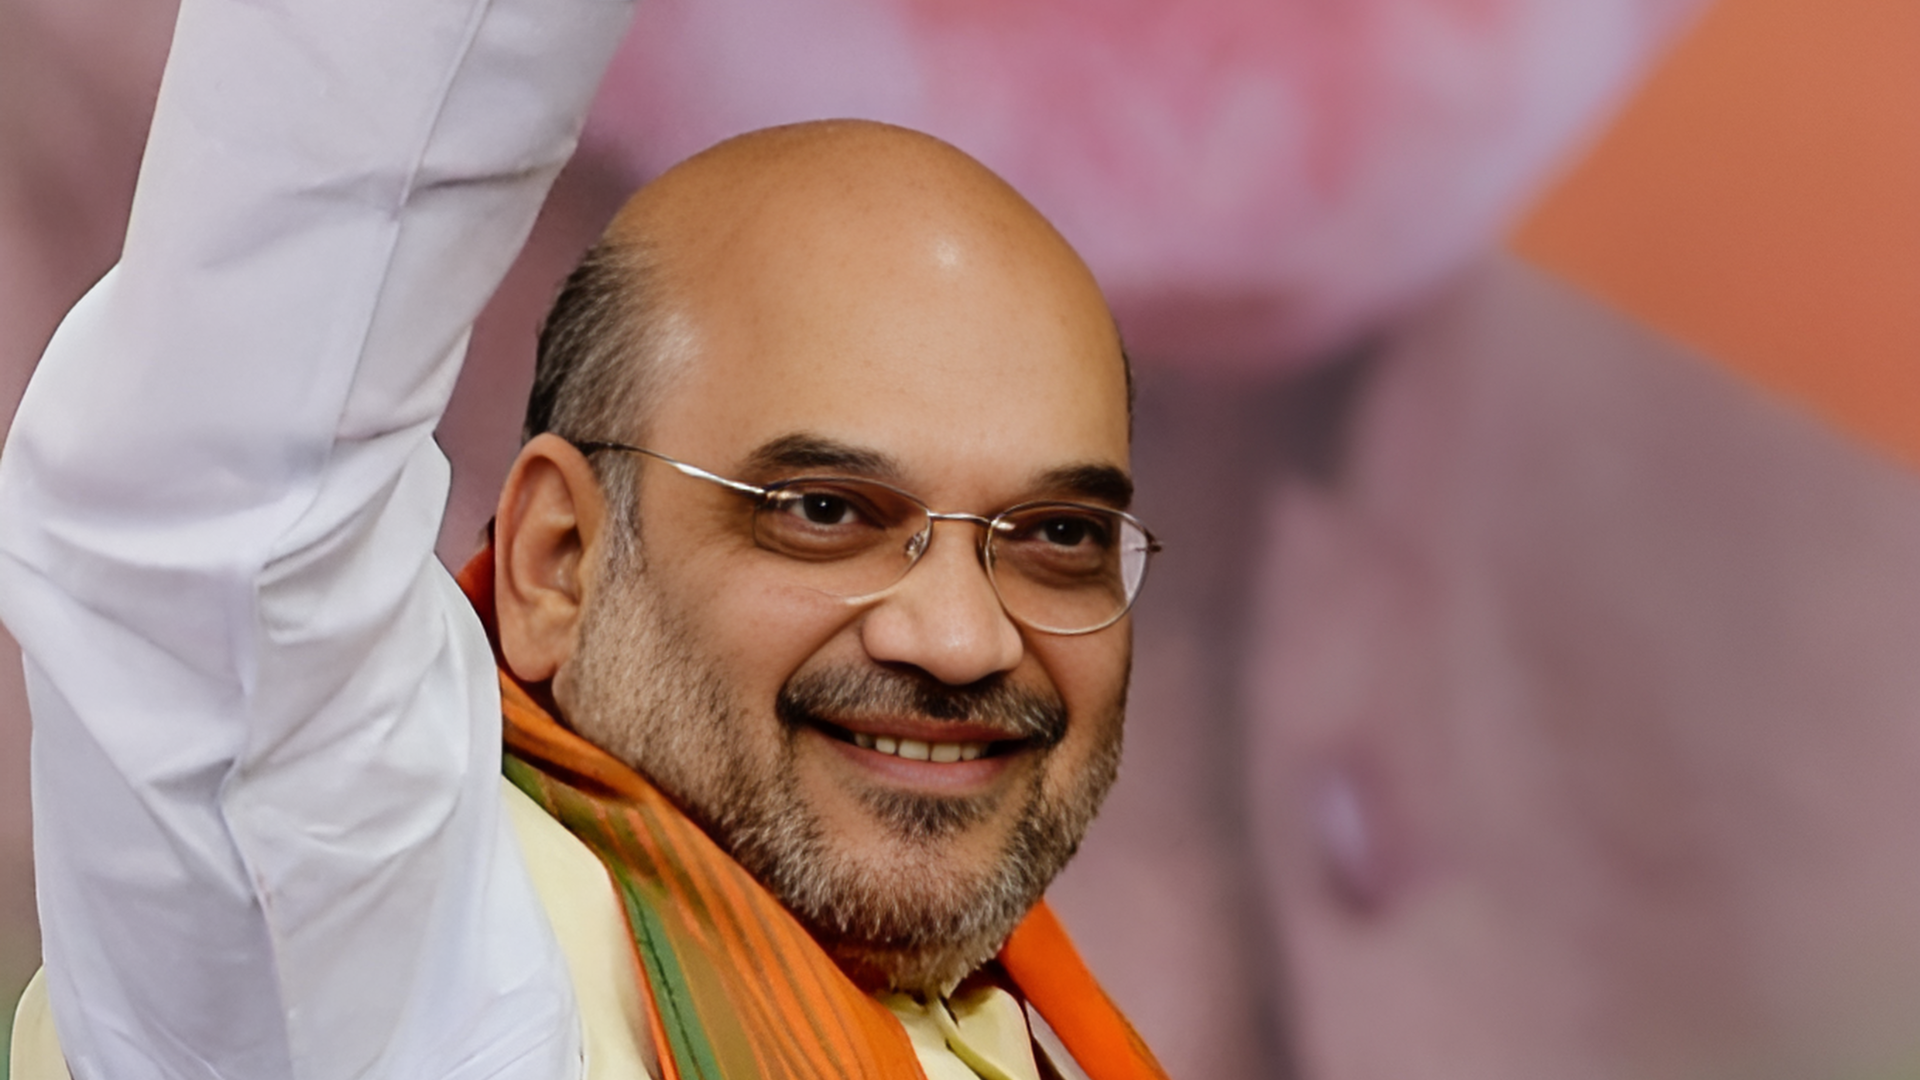 Case Filed Against Amit Shah Over Poll Code Violation, “Minor Children Were On The Dais With Amit Shah”